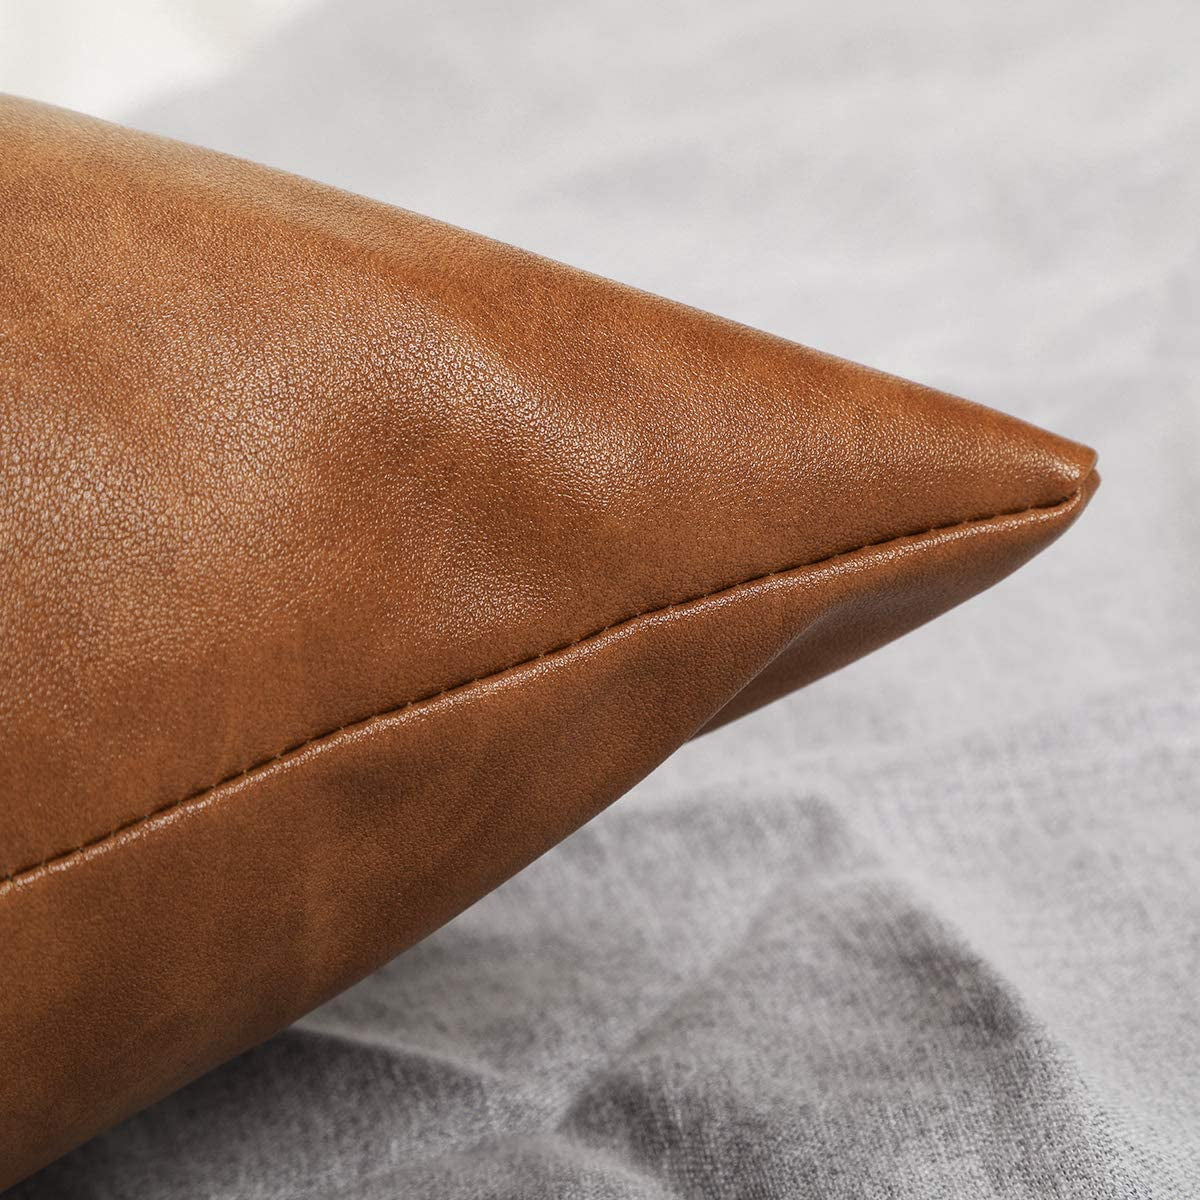 Set of 2 Brown Faux Leather Accent Throw Pillow Covers, 18X18 Inch - Modern Country Farmhouse Style Pillowcases for Bedroom, Living Room, and Sofa